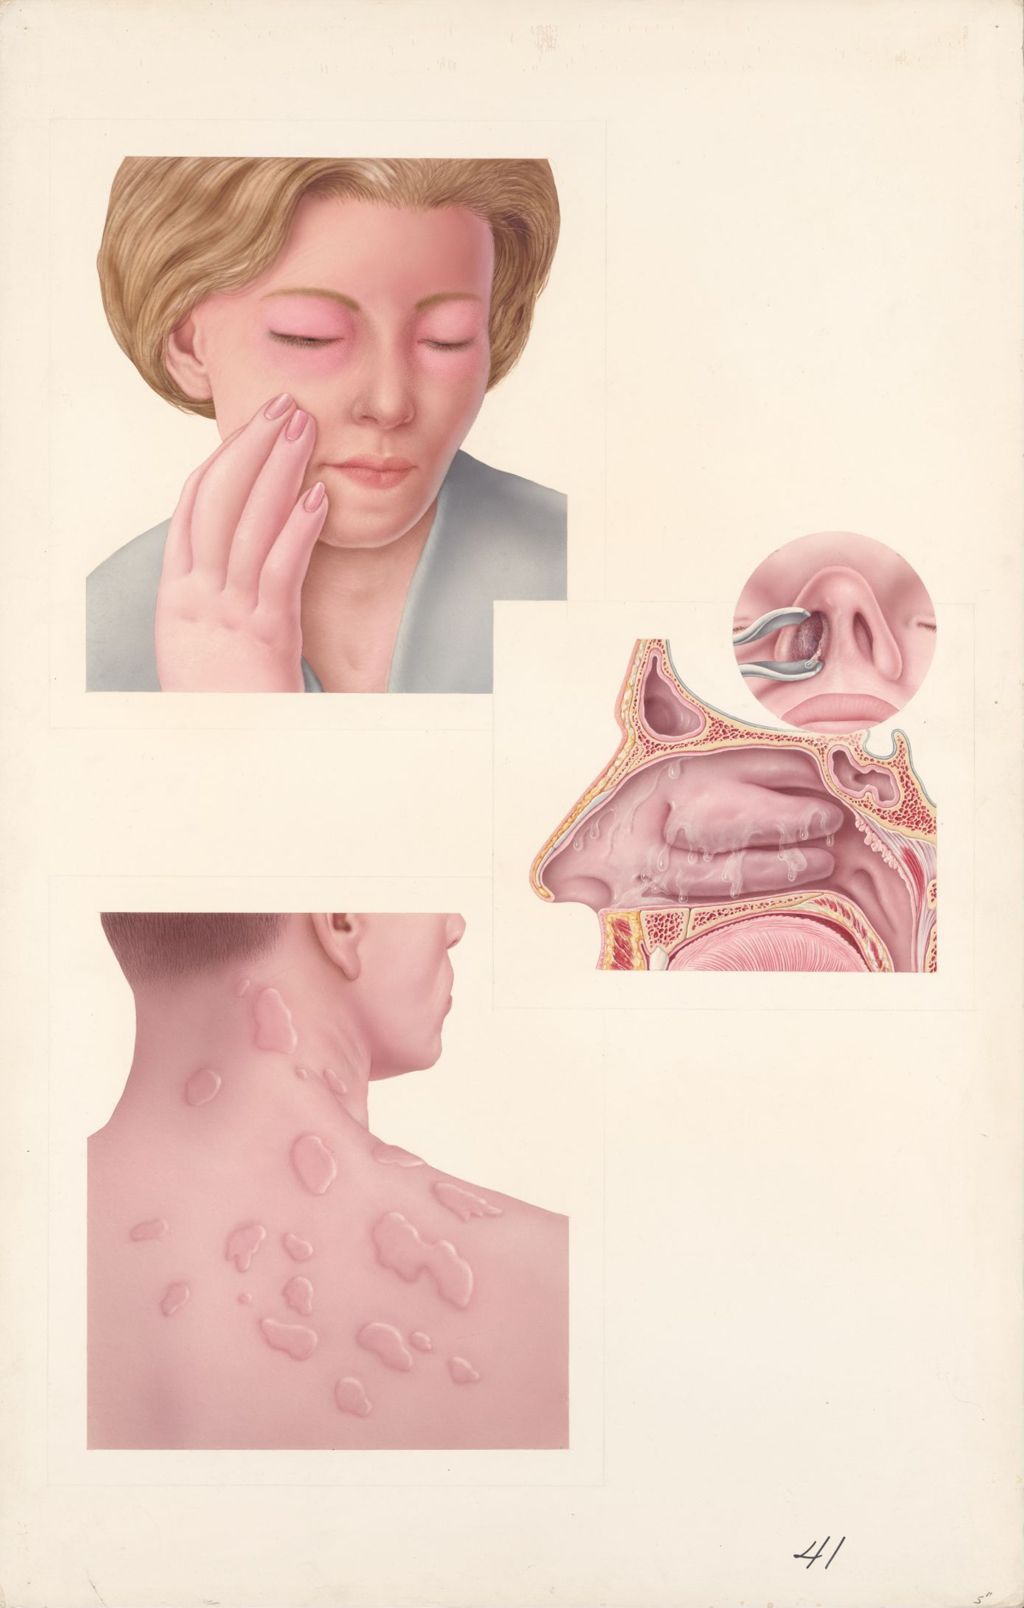 Miniature of Medical Profiles, Decadron, Dual phase, Several representative manifestations of allergic reactions